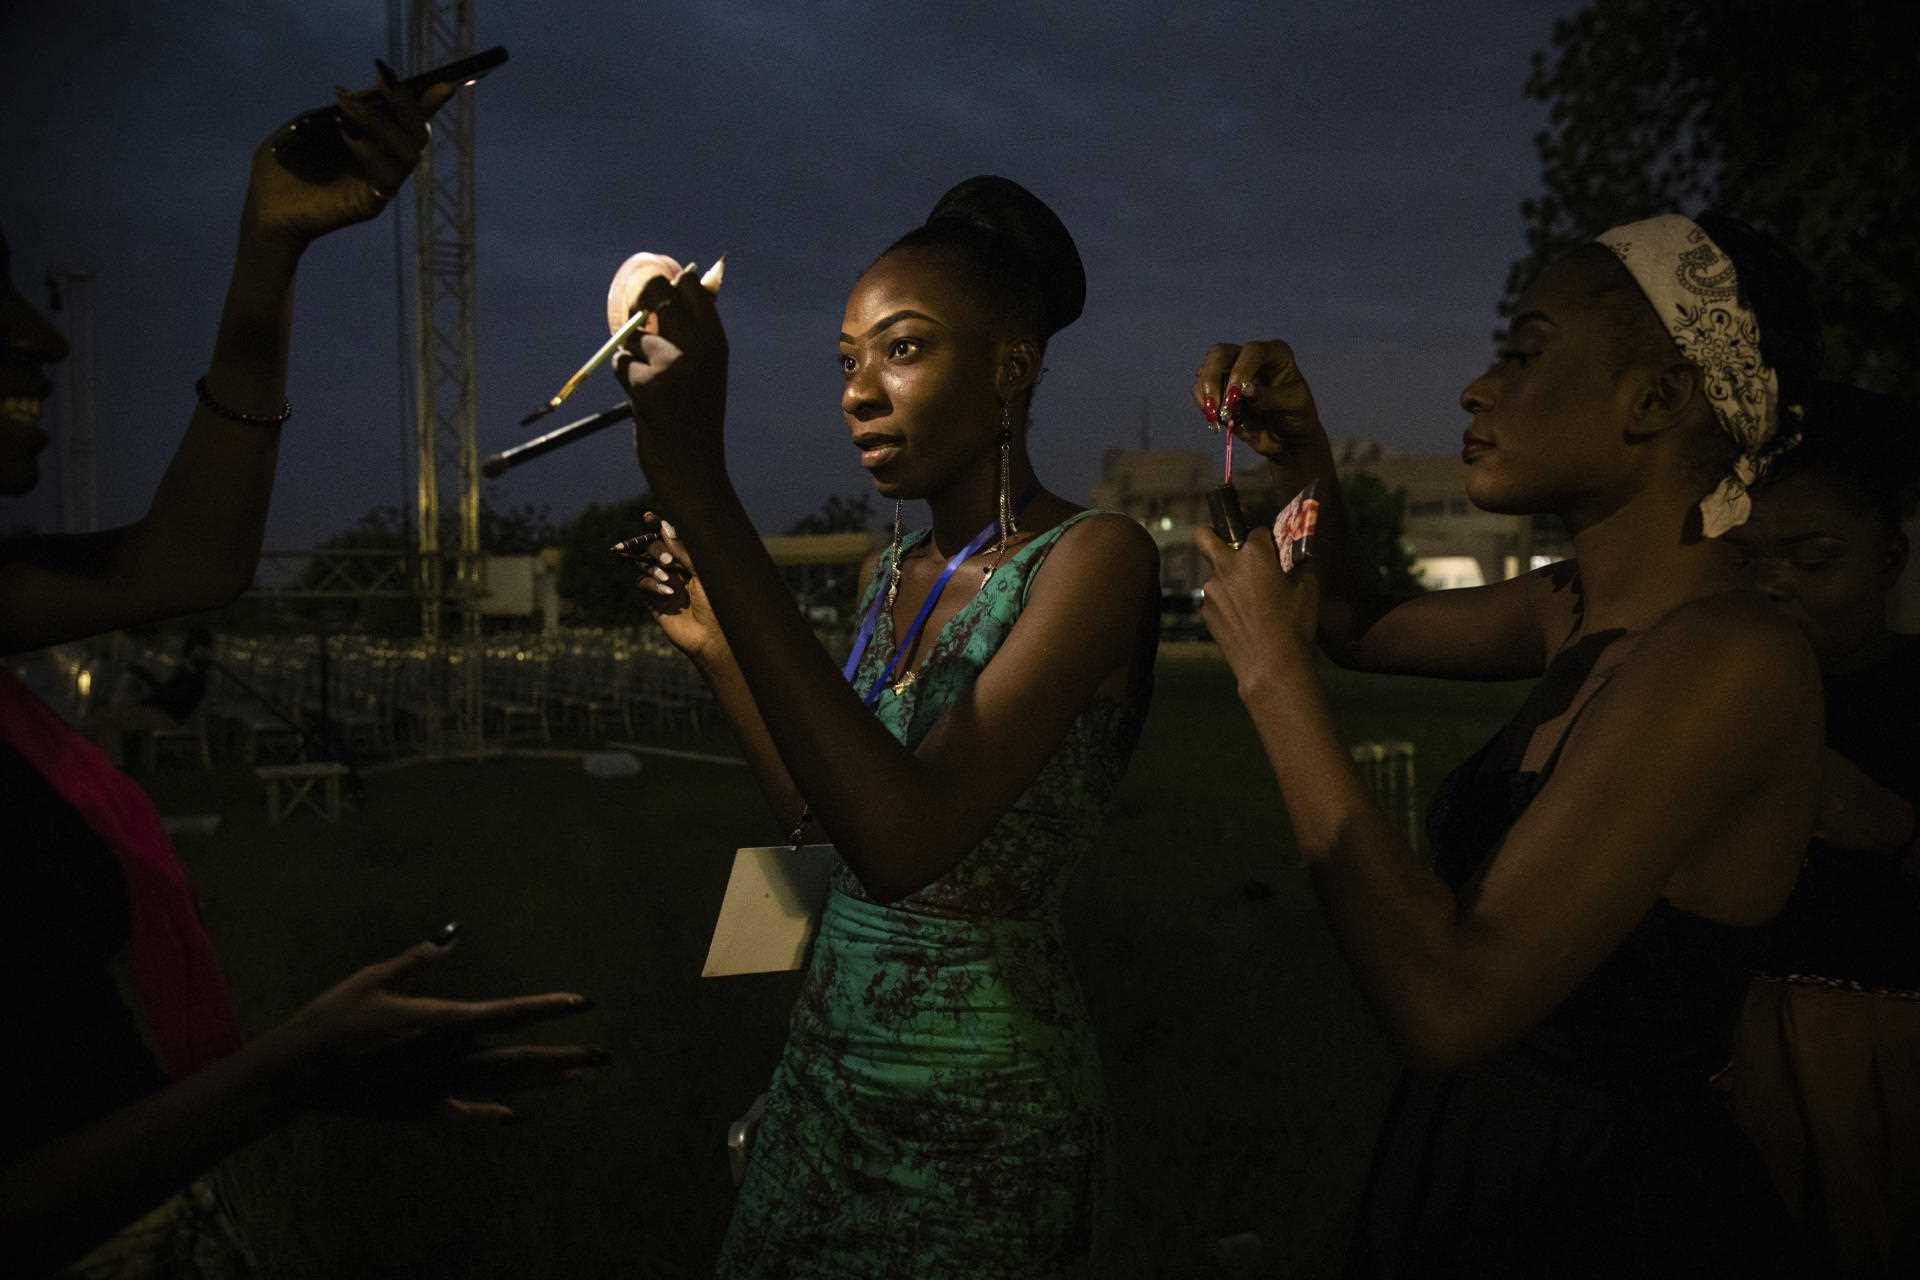 Teams use their phone lights during a power outage to apply makeup before the parade, Friday, May 13, 2022 in Ouagadougou, Burkina Faso. 